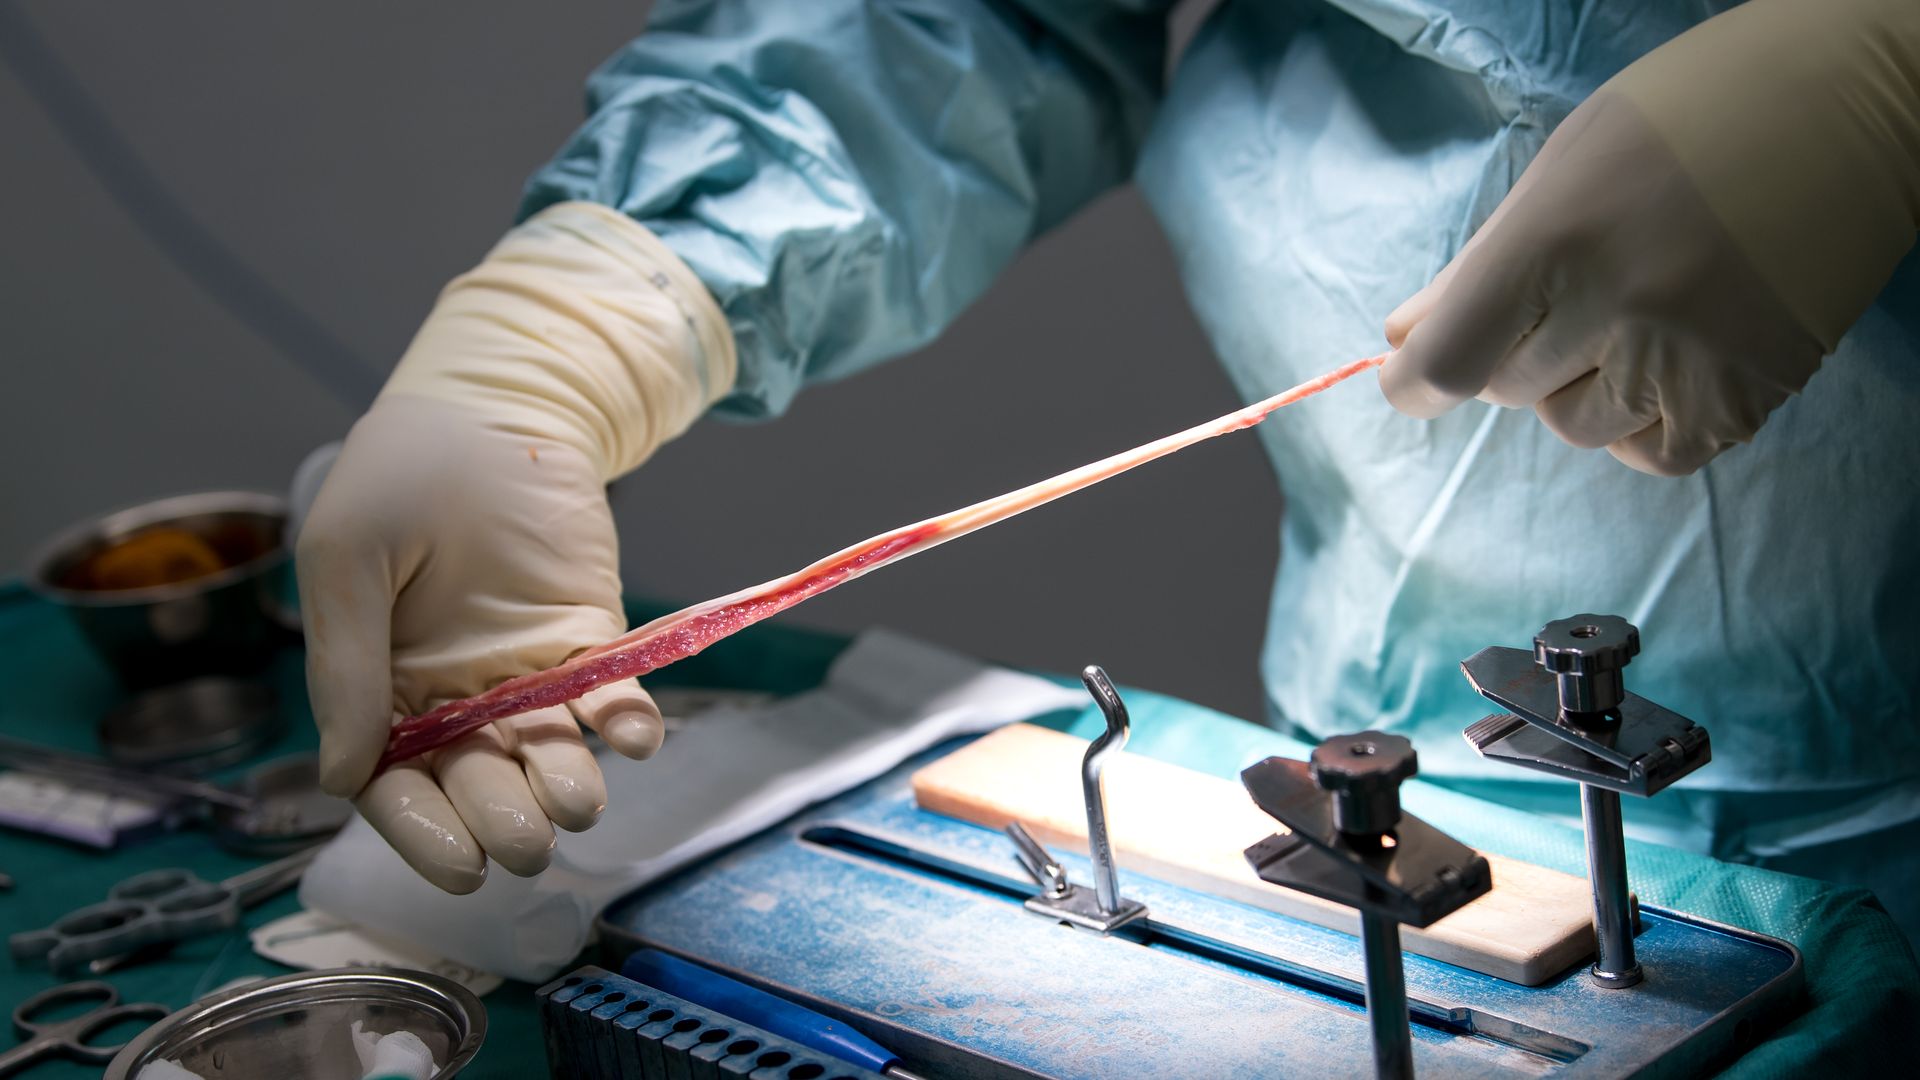 A surgeon holds a knee tendon above a table full of medical devices.